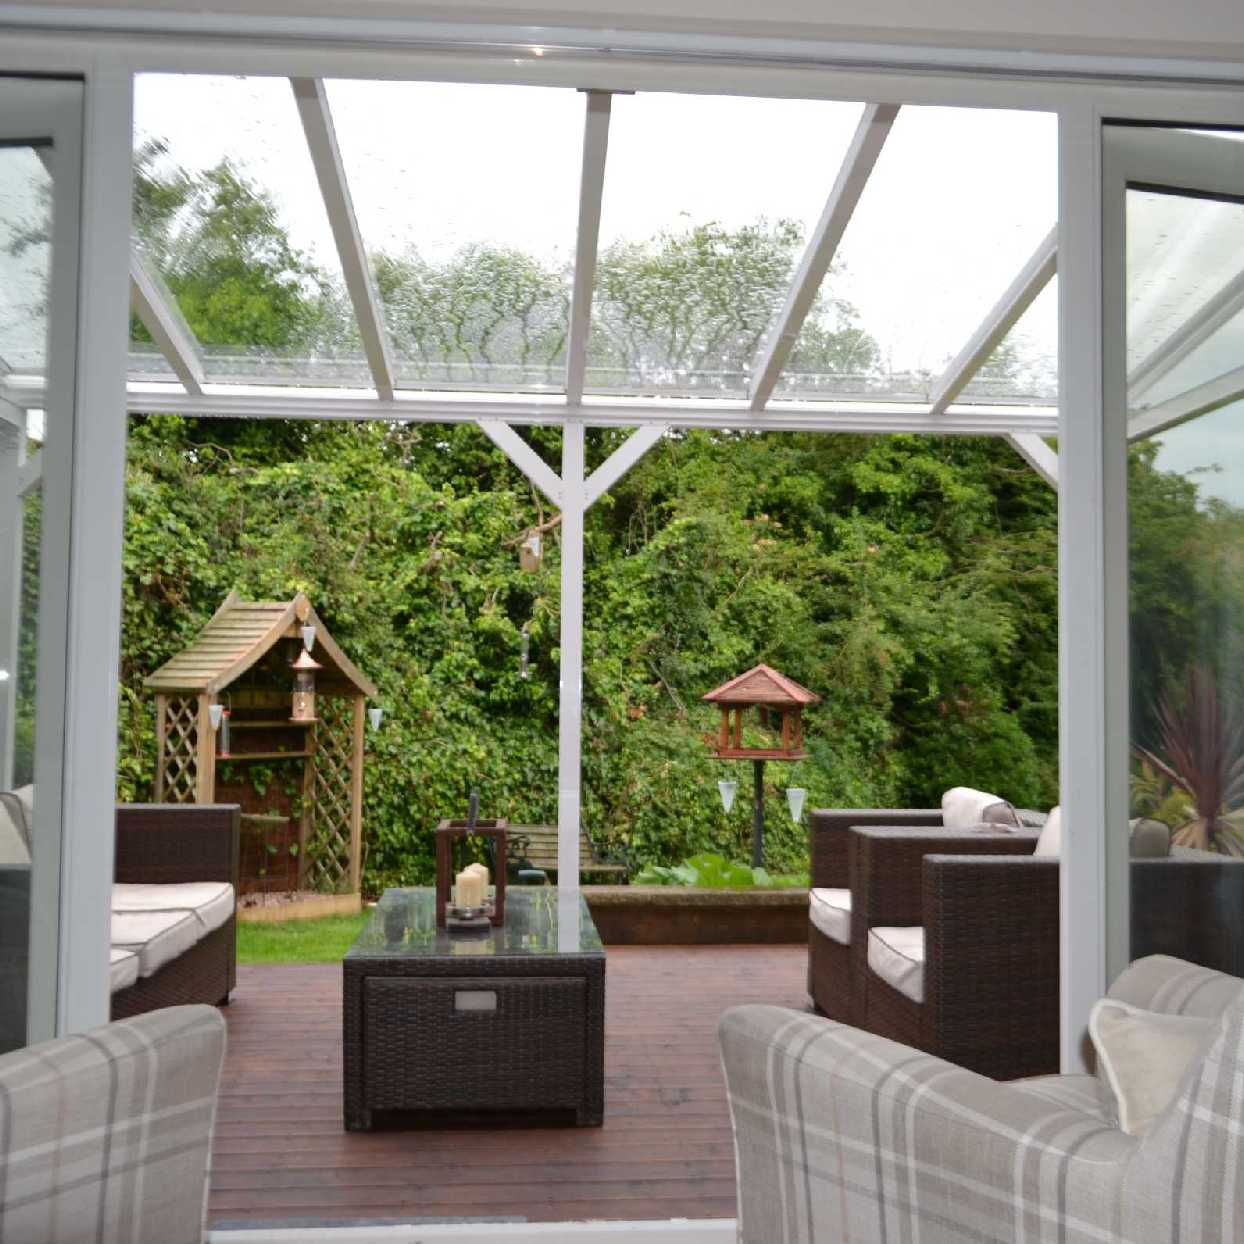 Buy Omega Smart Free-Standing, White MonoPitch Roof Canopy with 6mm Glass Clear Plate Polycarbonate Glazing - 4.2m (W) x 2.0m (P), (6) Supporting Posts online today